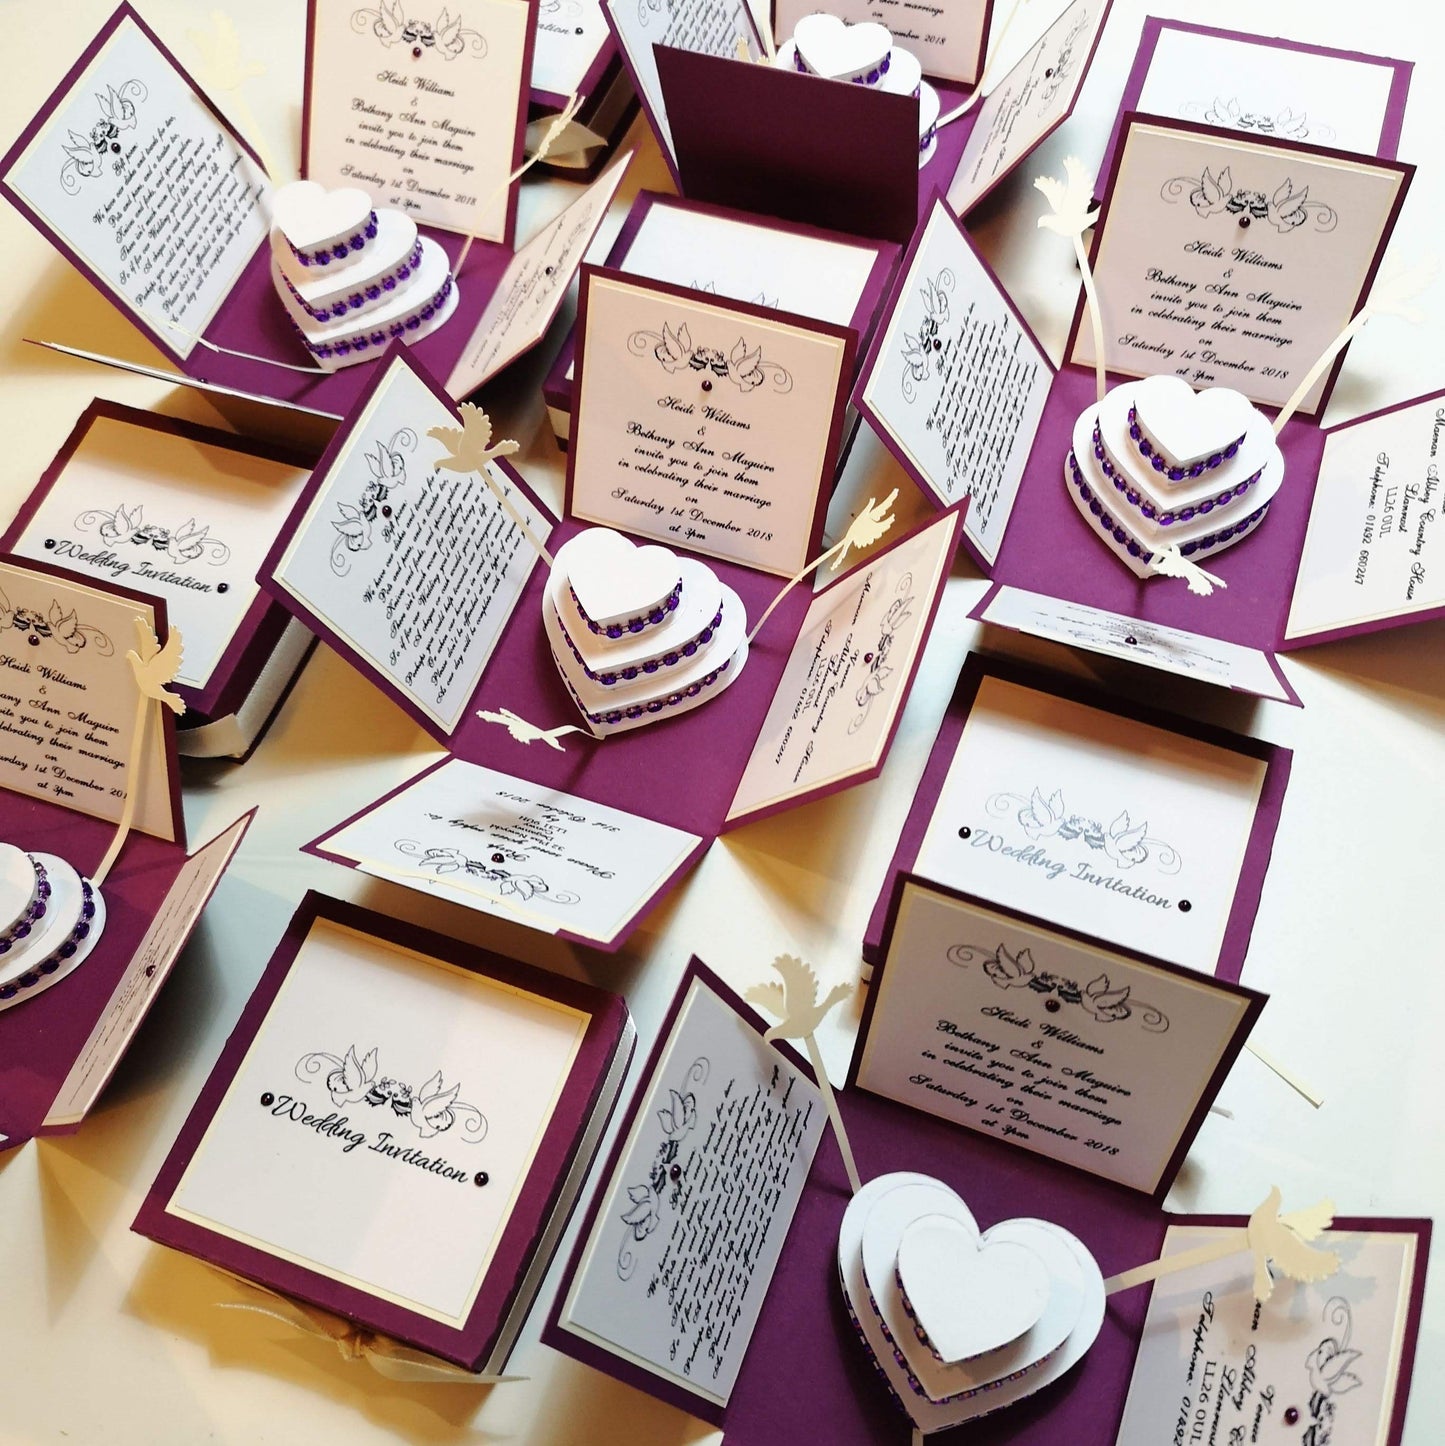 Hearts & Doves Range - In Purple & Cream.   A totally unique 3'' Square Exploding Wedding Invitation Box featuring two fixed panels, One with Invitation details and the other with Venue details. There are also two waistcoat-styled pockets with pull-out panels containing Menu &amp; Menu Choices Cards plus RSVP Card &amp; Gift Poem. The centre of these boxes contains a three-tier Heart-shaped Wedding cake decorated with diamonds and color-coordinating ribbon strips. 